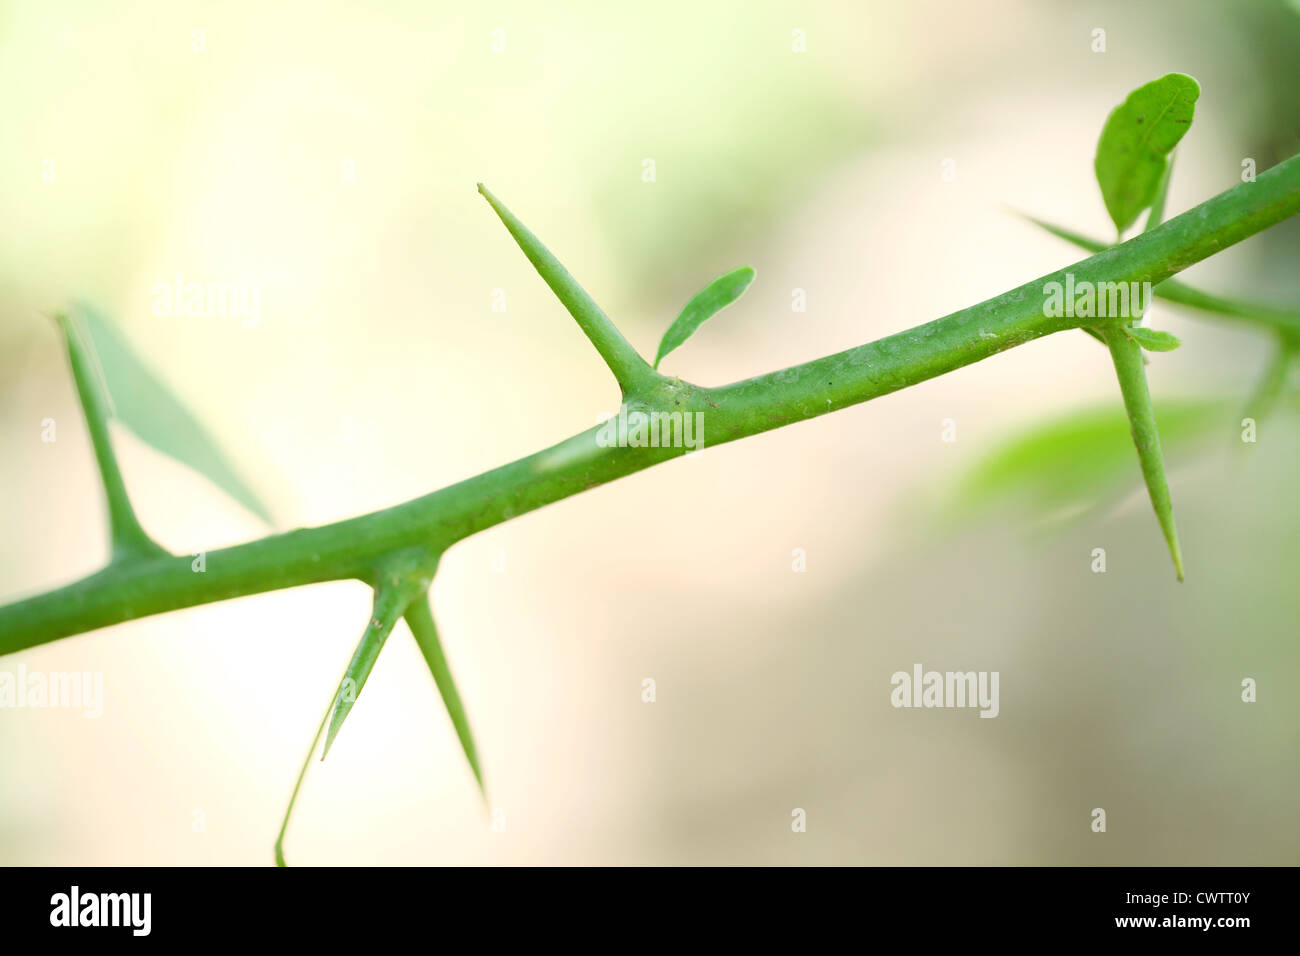 Closeup view of plant twig with thorns Stock Photo